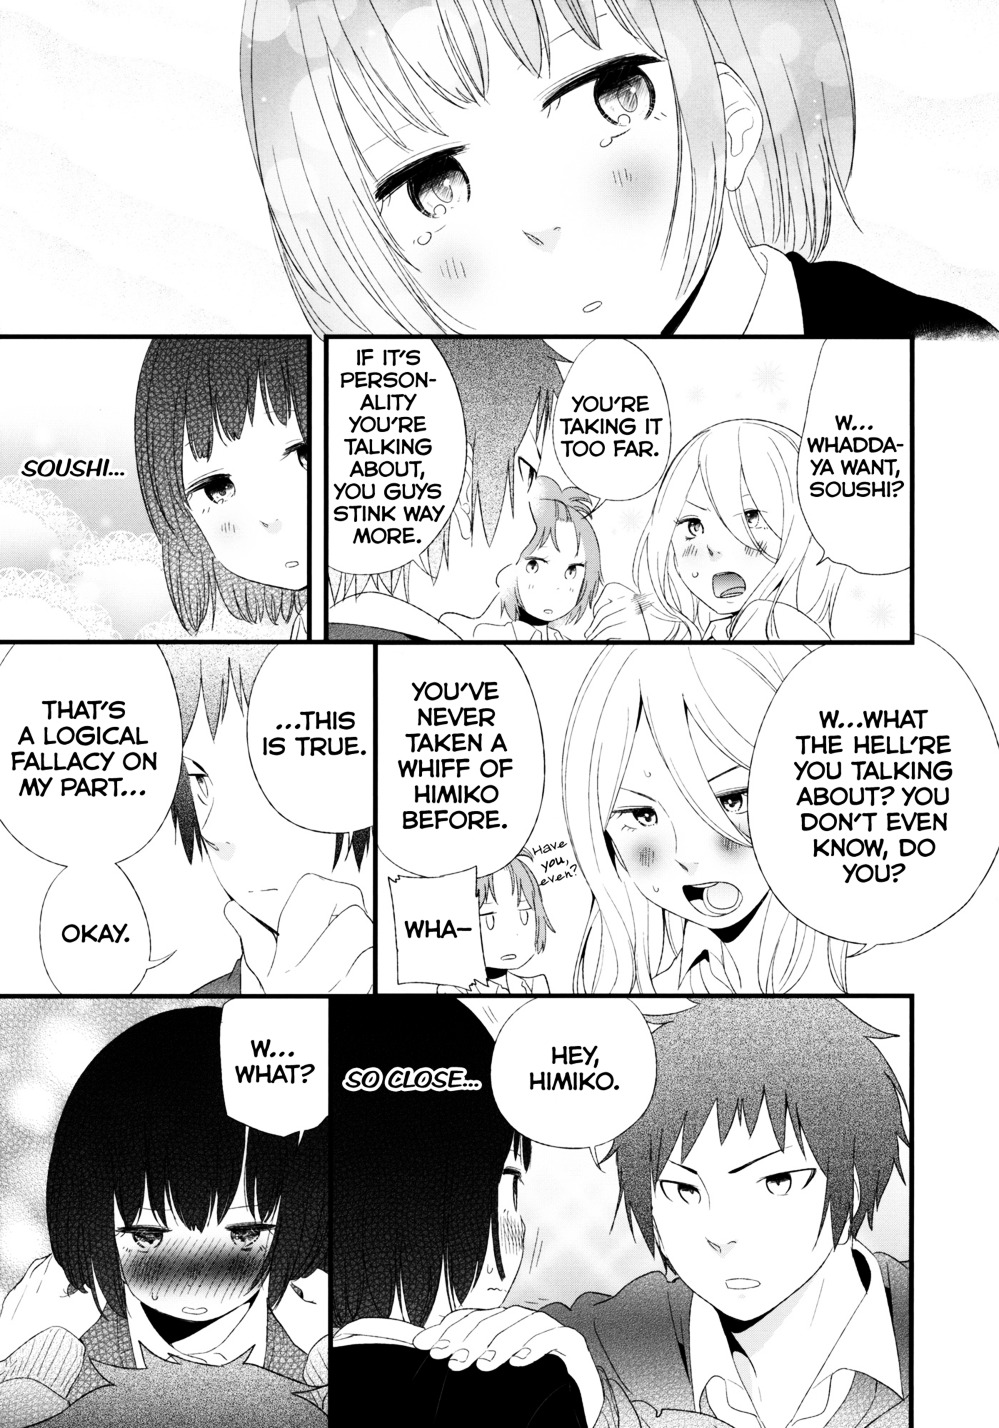 Kimi Tte Donna Nioi Nano? Vol.1 Chapter 0 : What Do You Smell Like? [Complete] - Picture 3